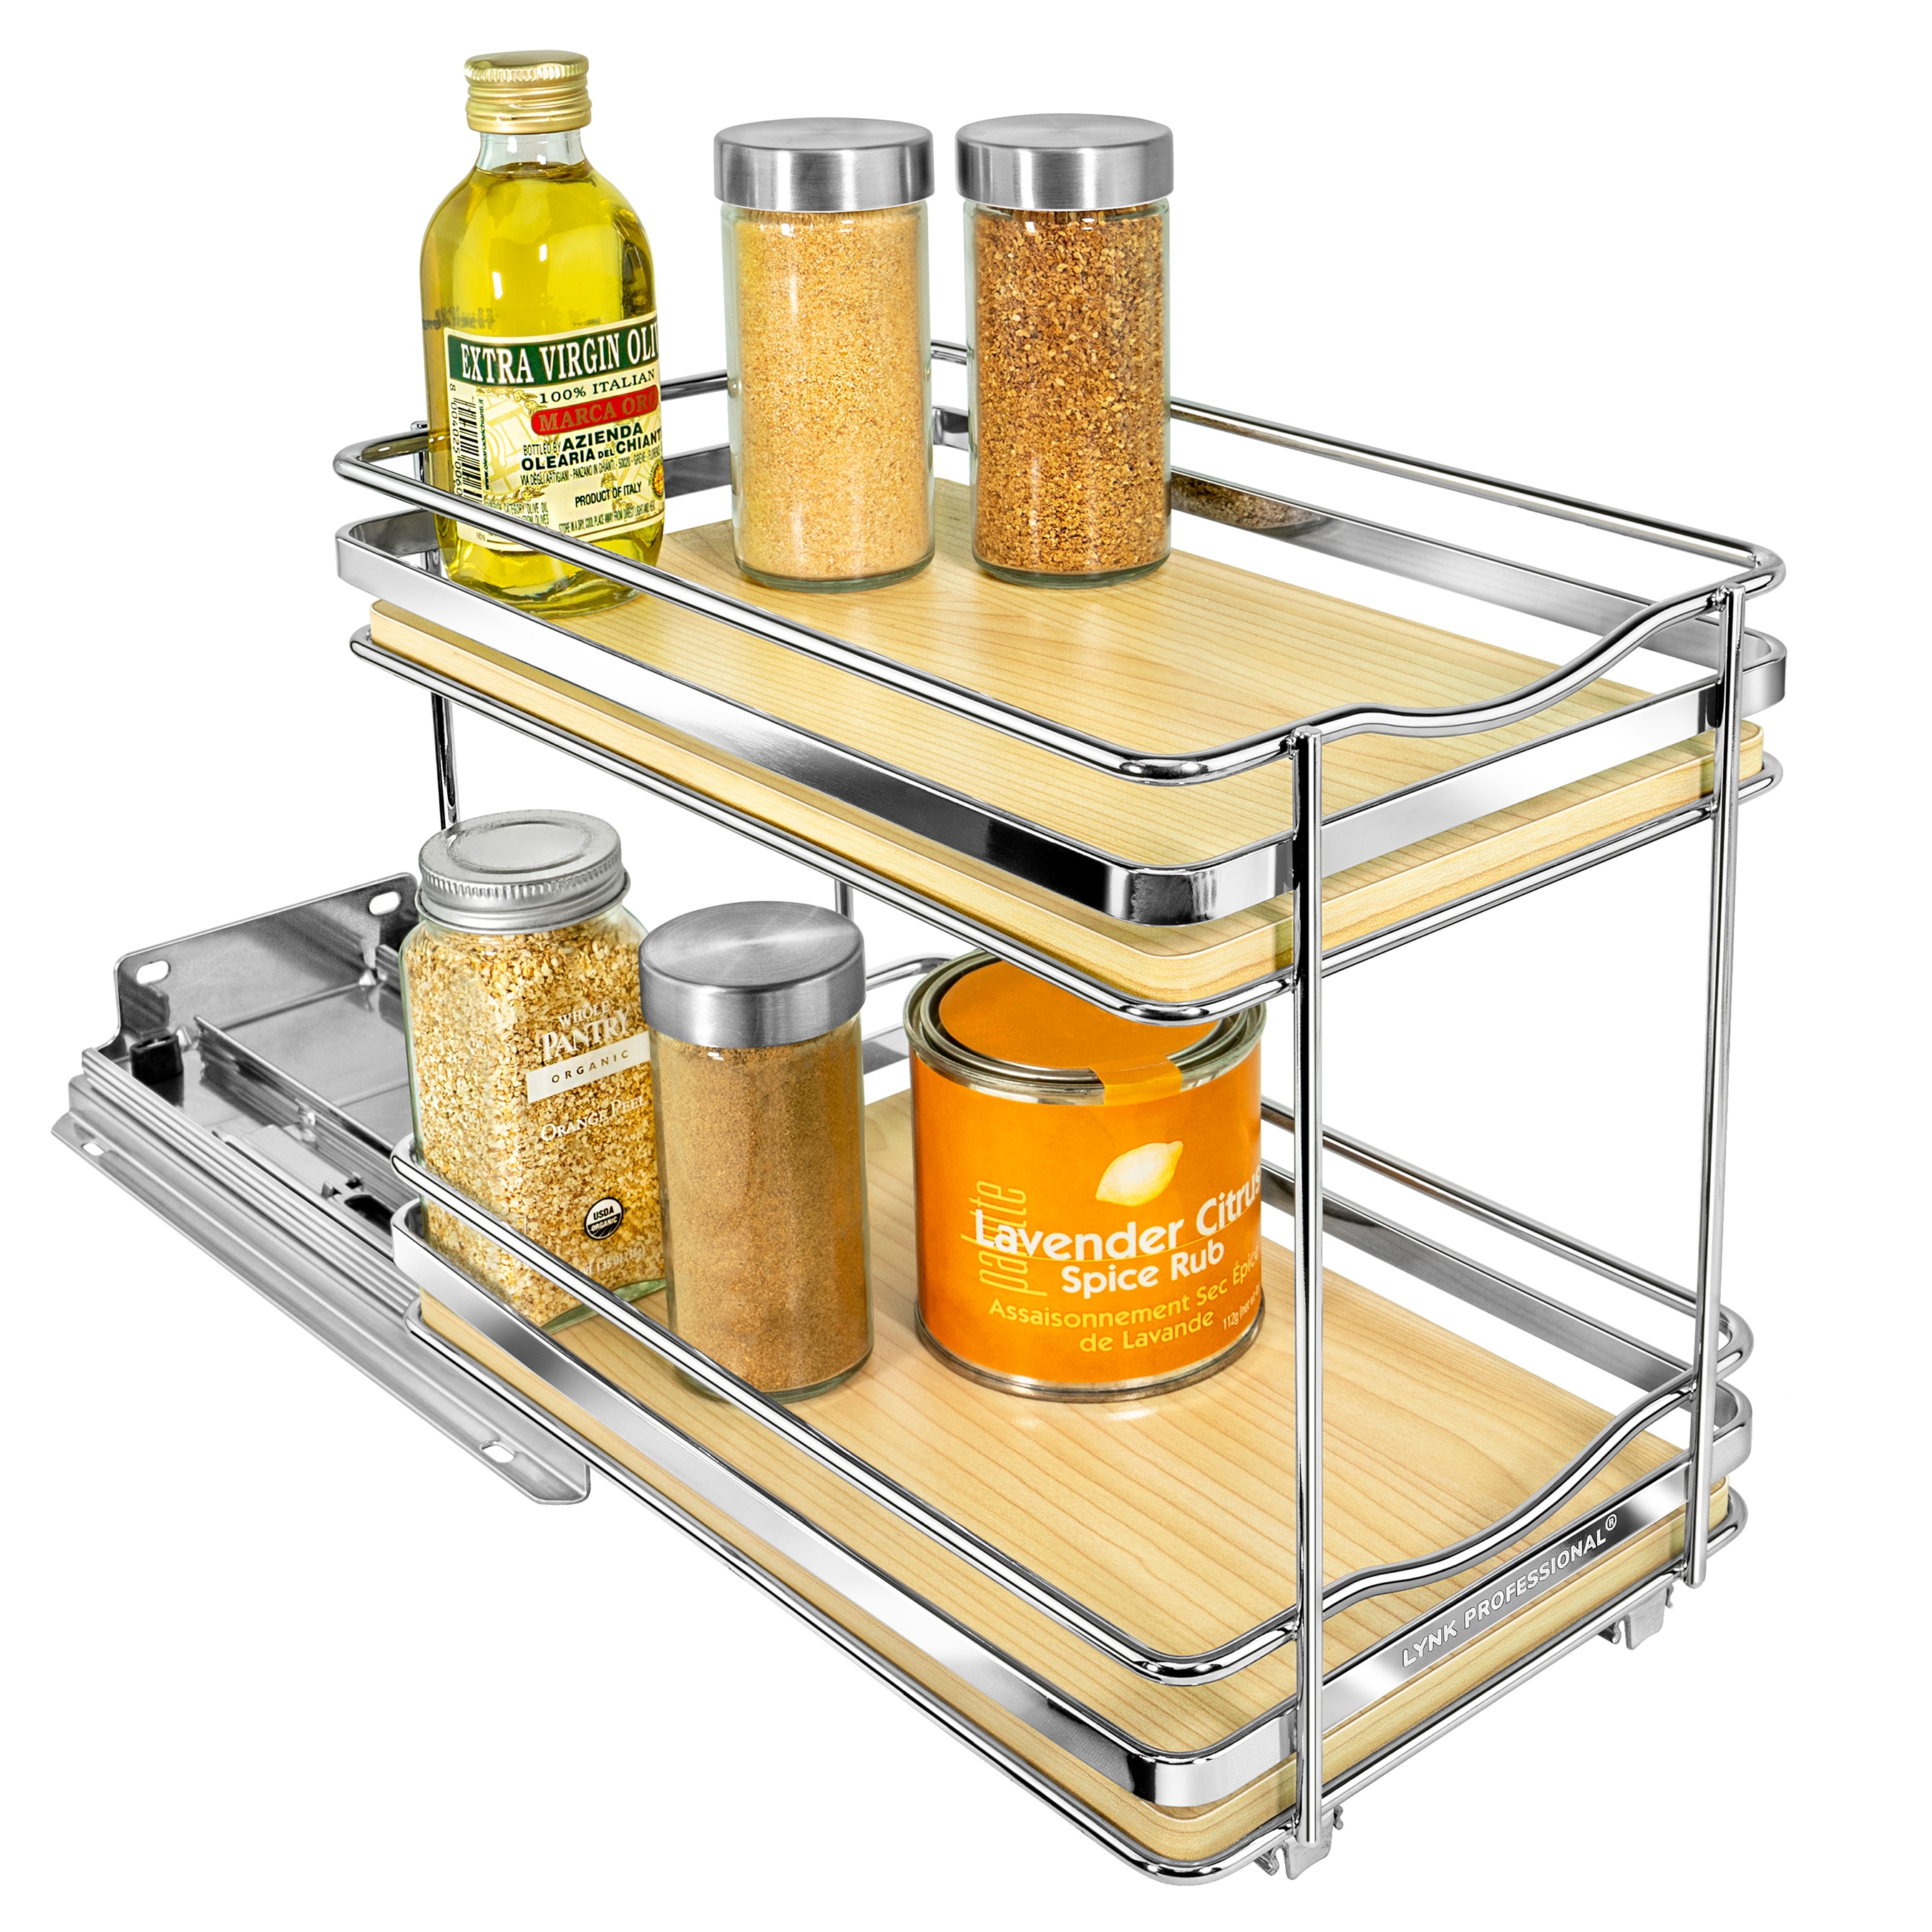 430422 Professional Roll Out Spice Organizer Two Tier - Lynk Inc